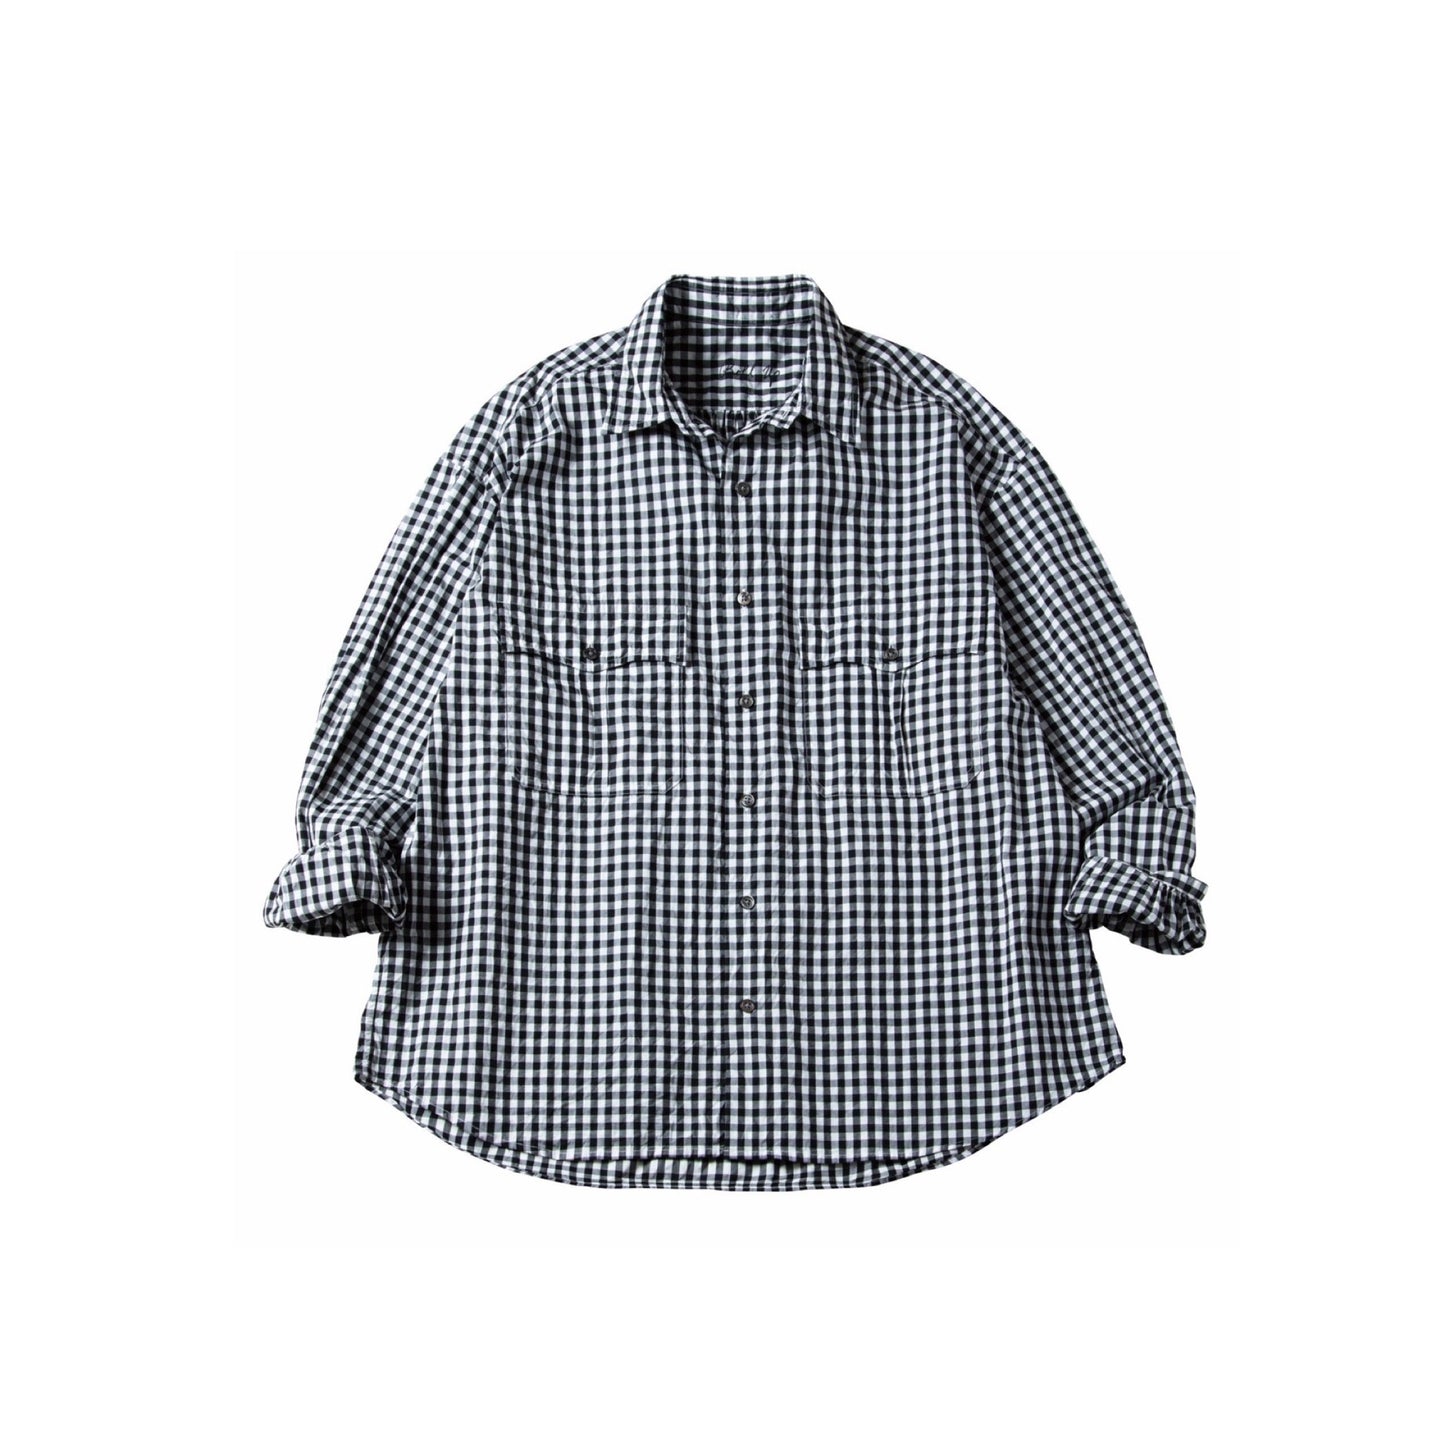 ROLL UP GINGHAM CHECK SHIRT